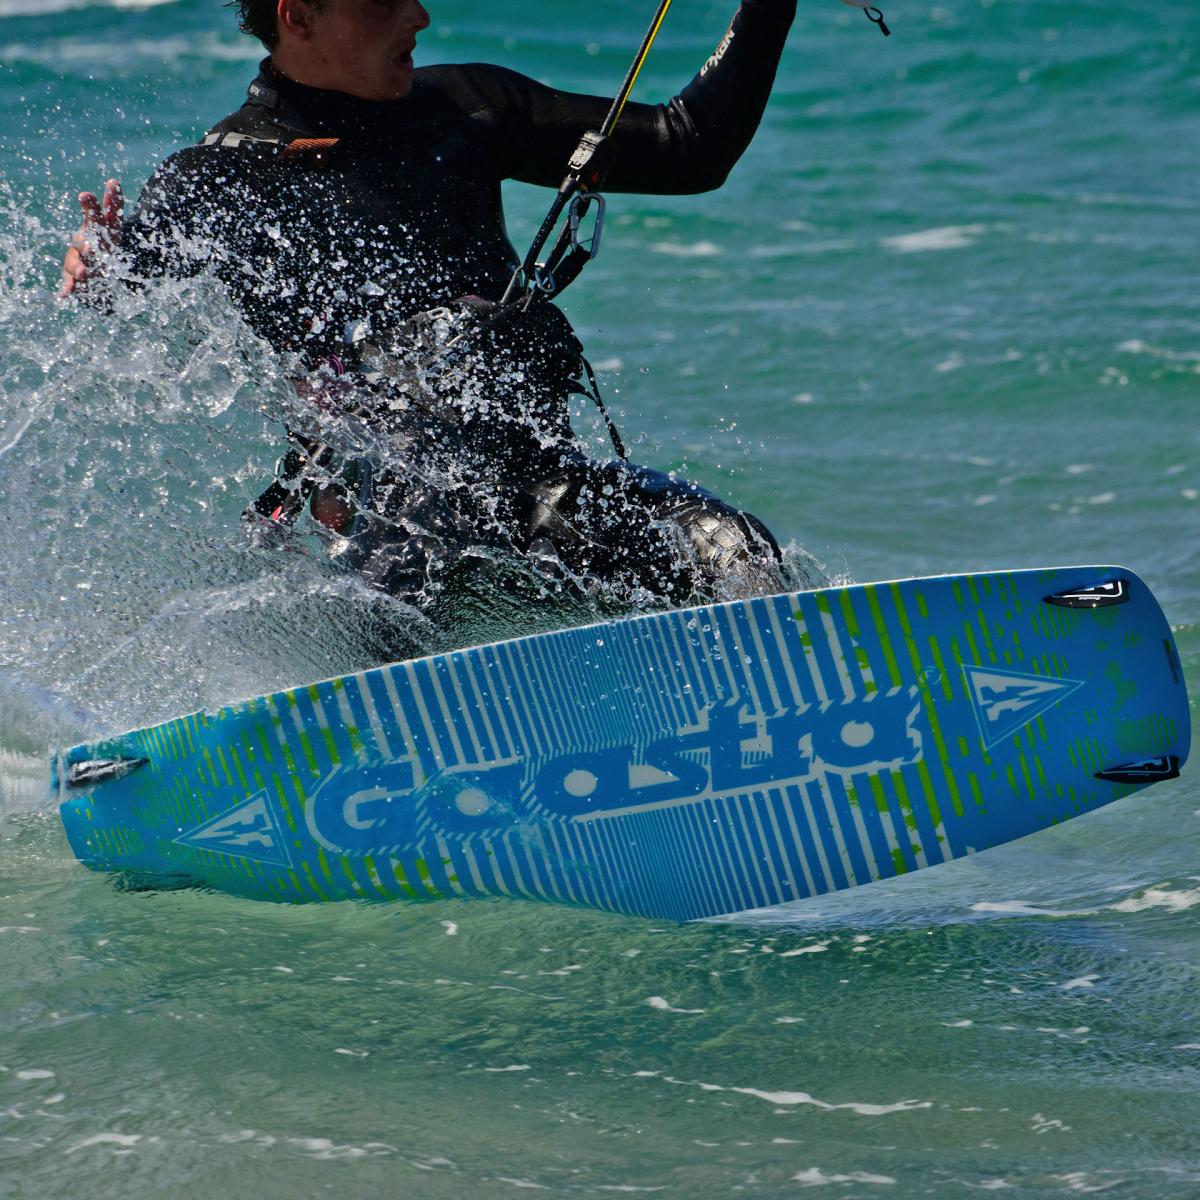 The new freeride kiteboard Blend from Gaastra now available at Funboard Center Boracay.